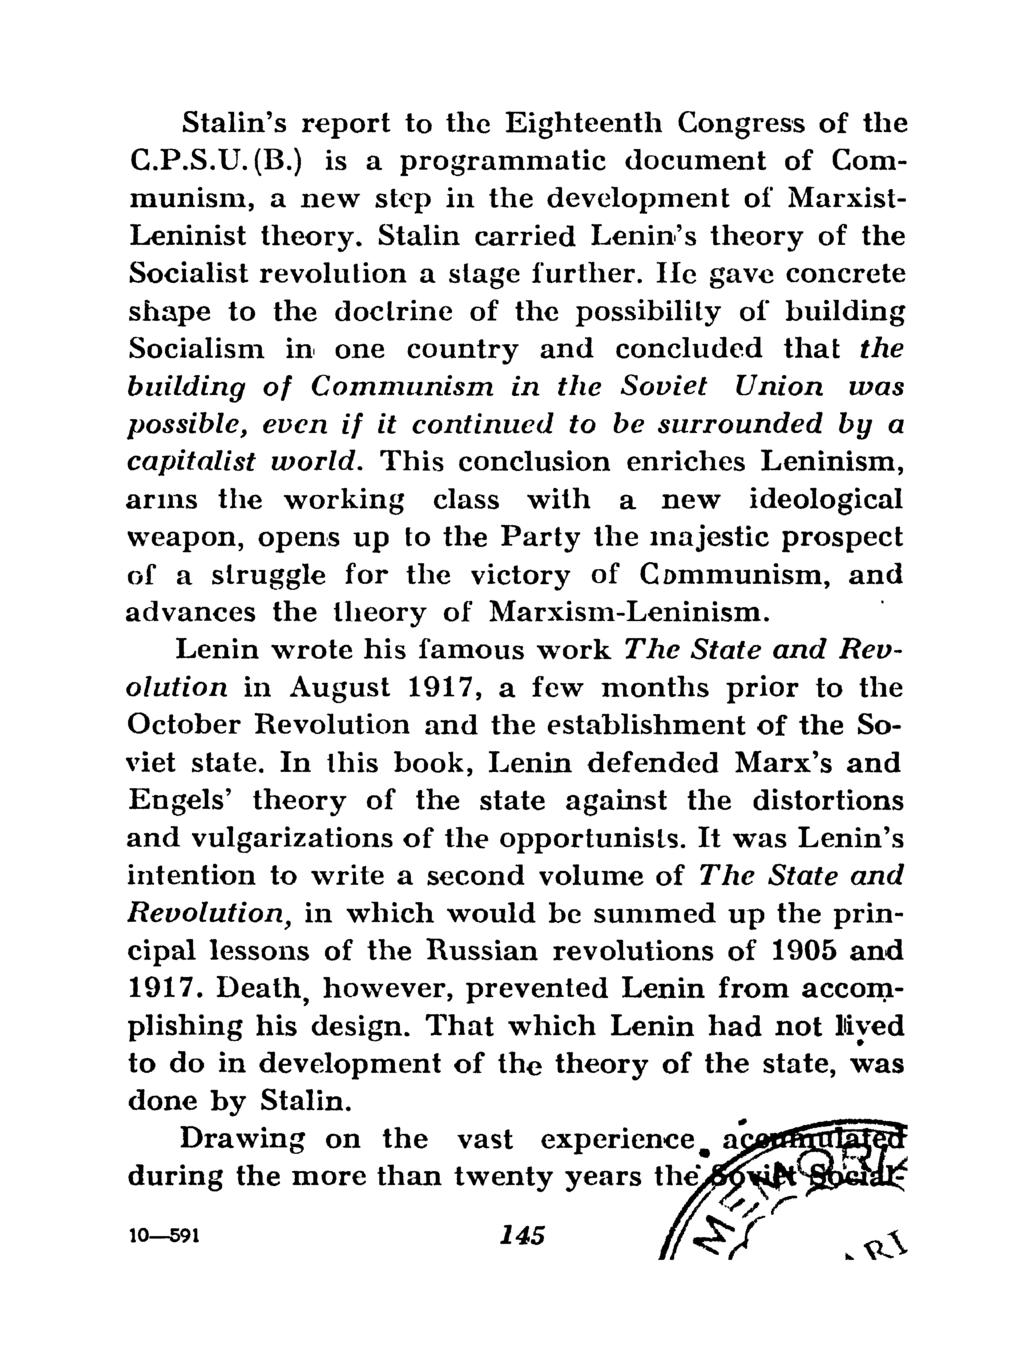 Stalin's report to the Eighteenth Congress of the C.P.S.U. (B.) is a programmatic document of Communism, a new step in the development of Marxist- Leninist theory.